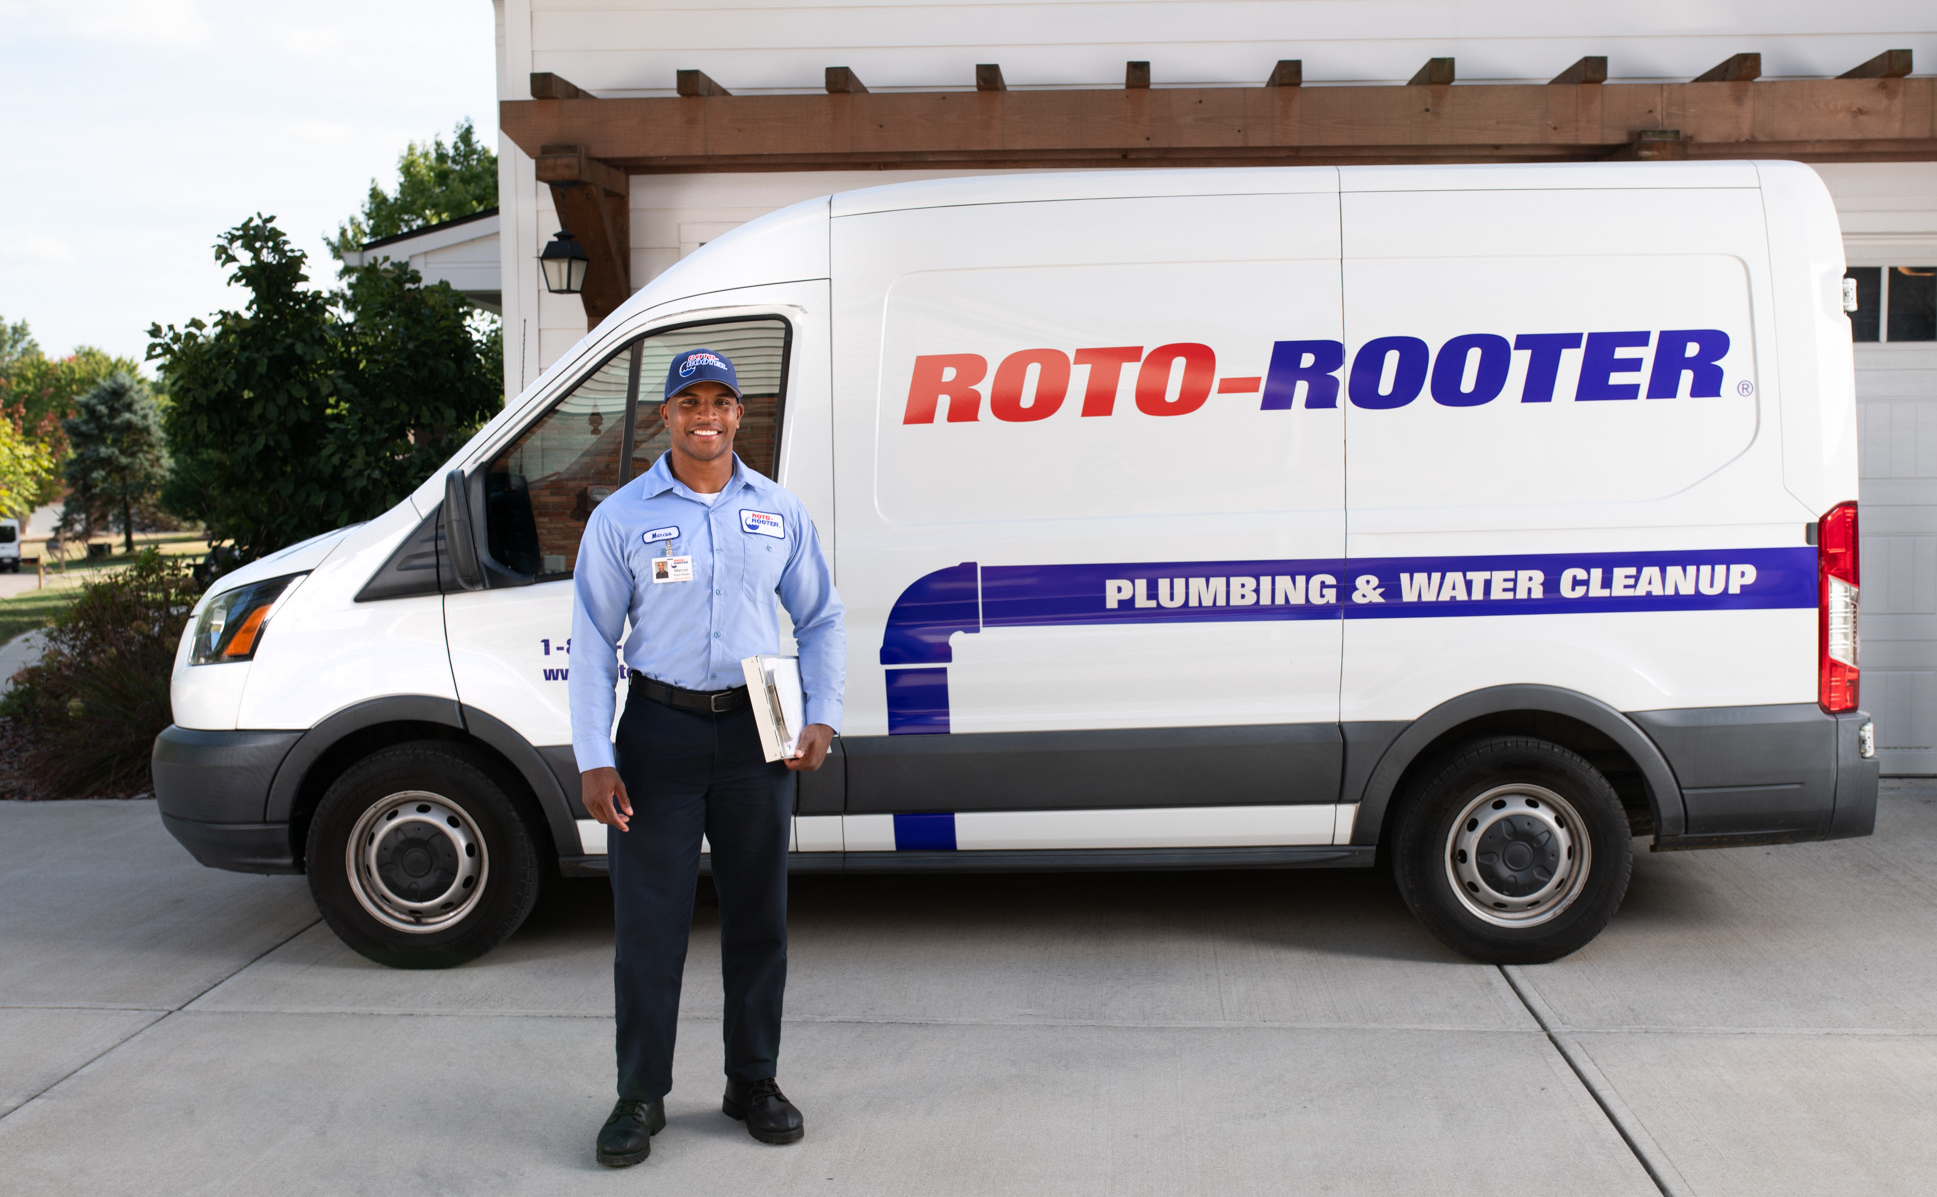 Roto-Rooter Plumbing & Water Cleanup 8387 OH-73 Ste A, Hillsboro Ohio 45133